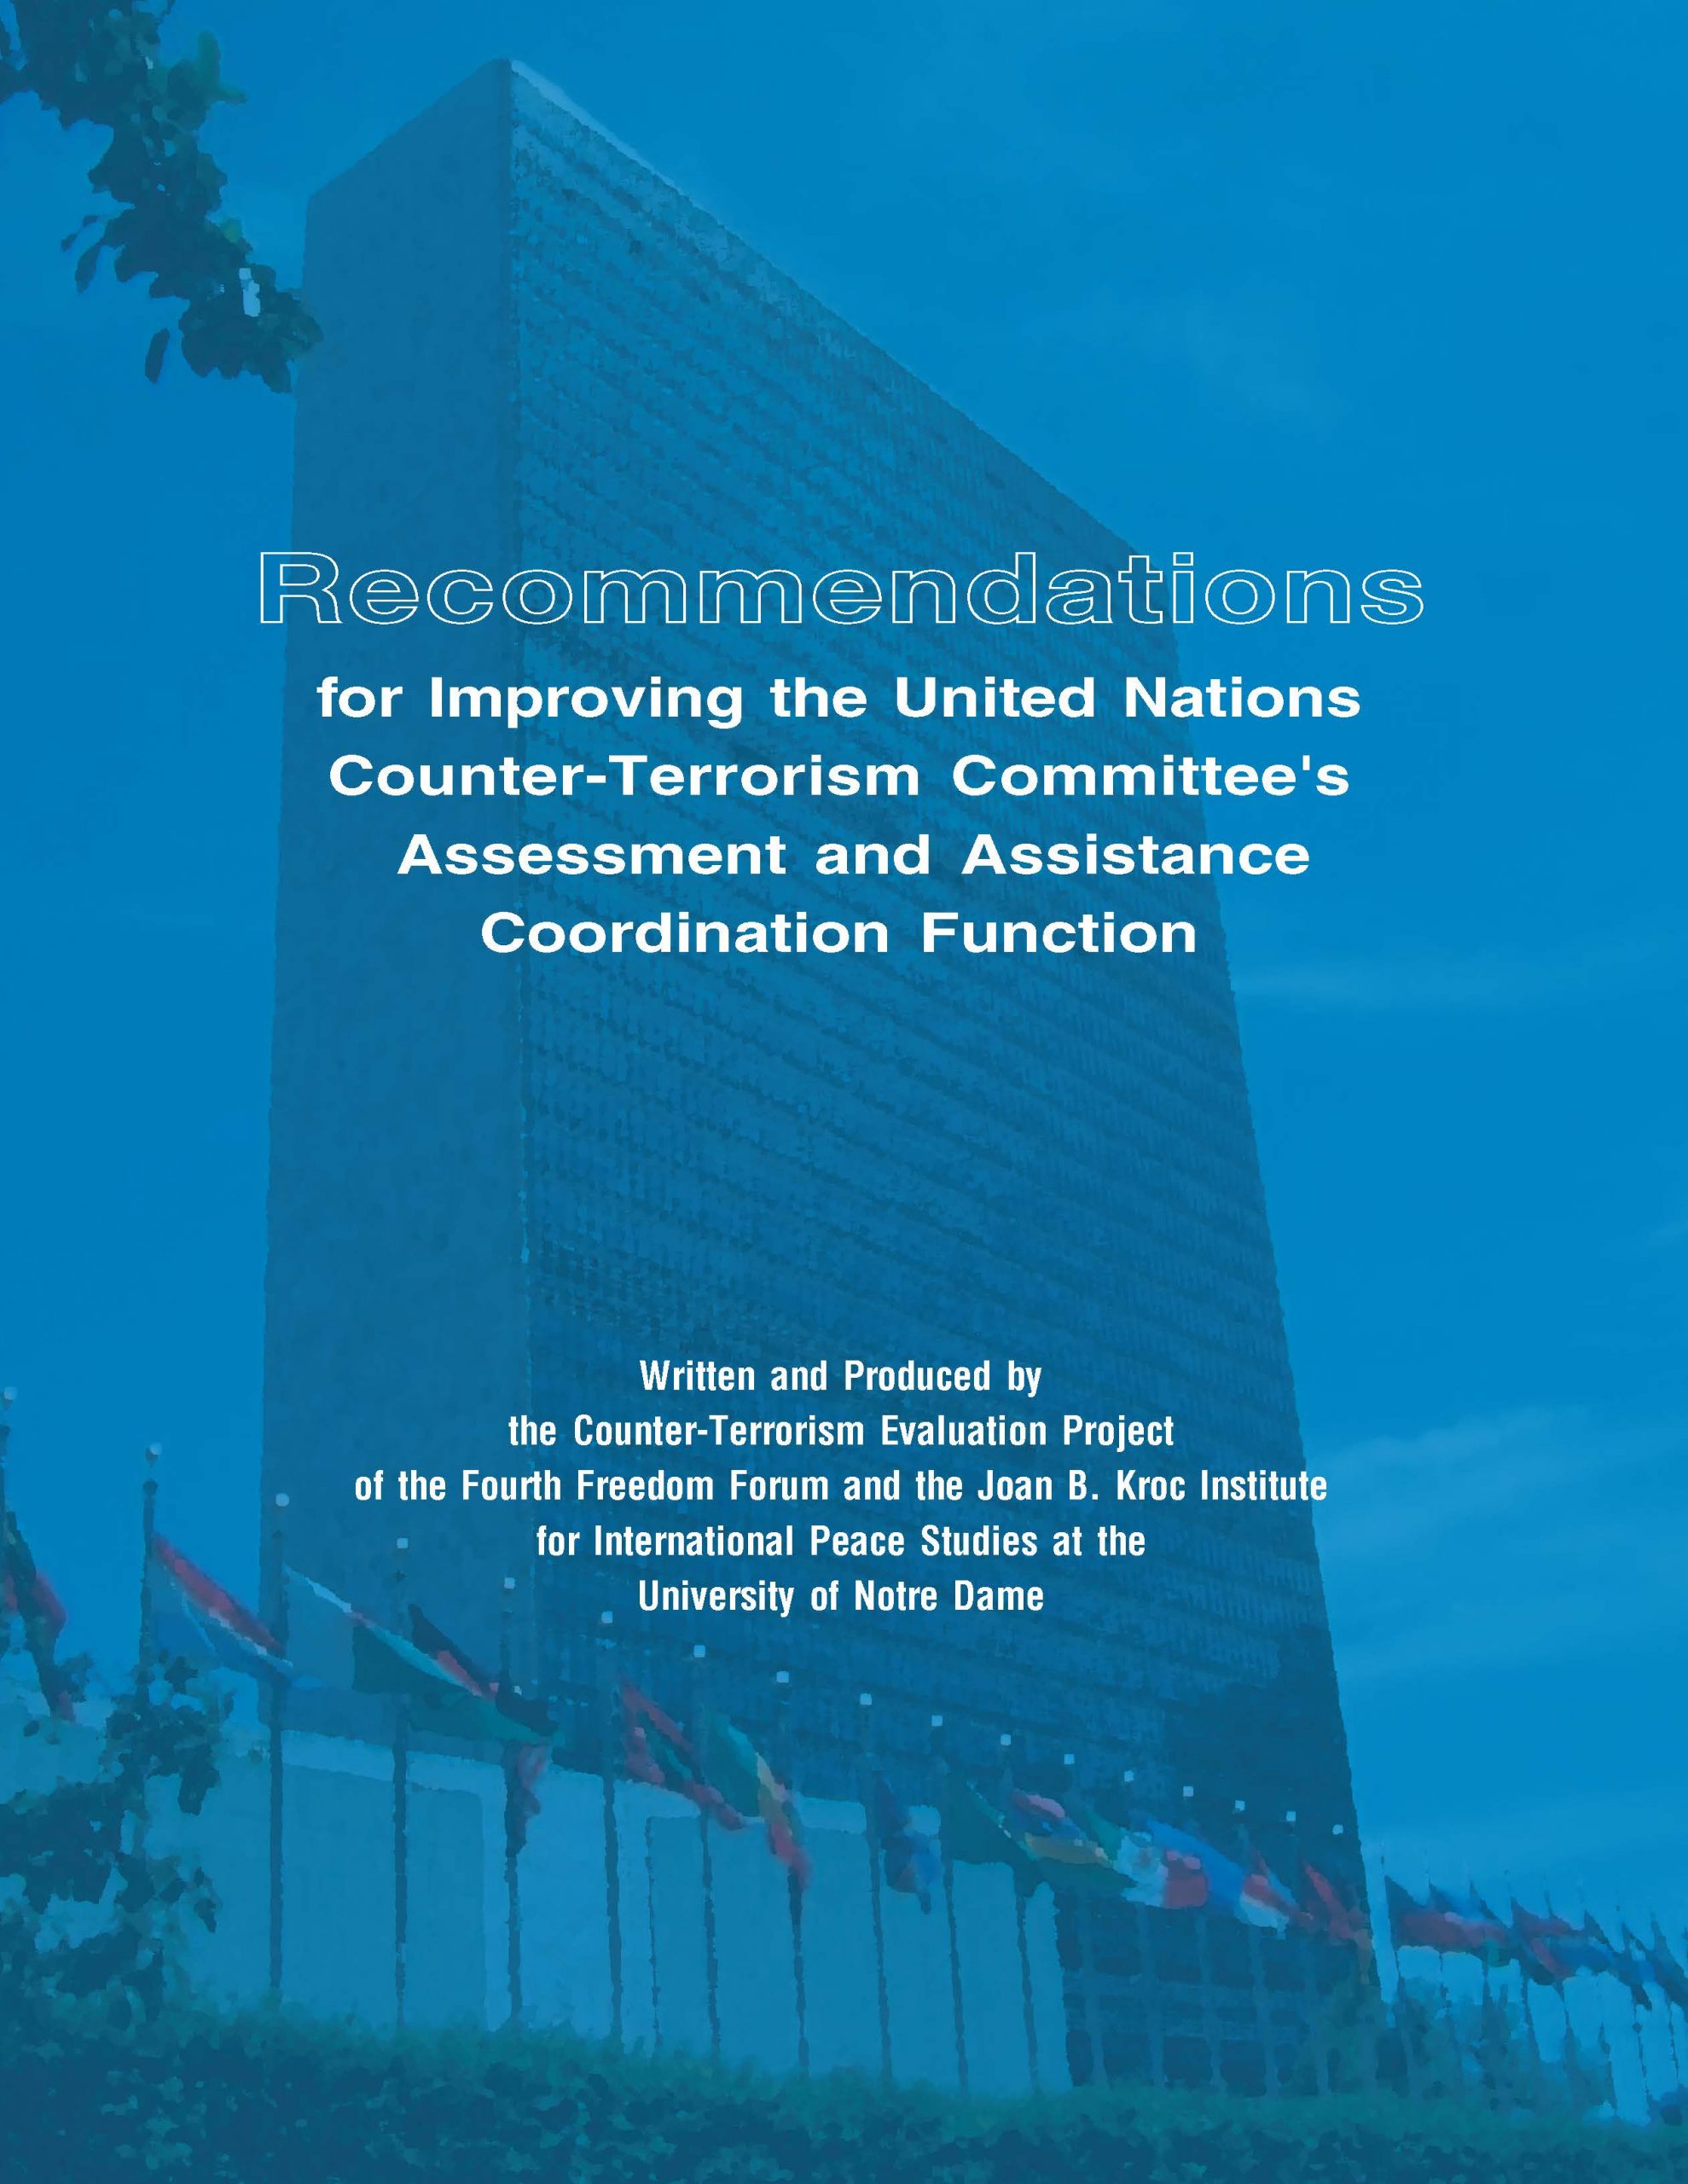 Recommendations for Improving the United Nations Counter-Terrorism Committee’s Assessment and Assistance Coordination Function